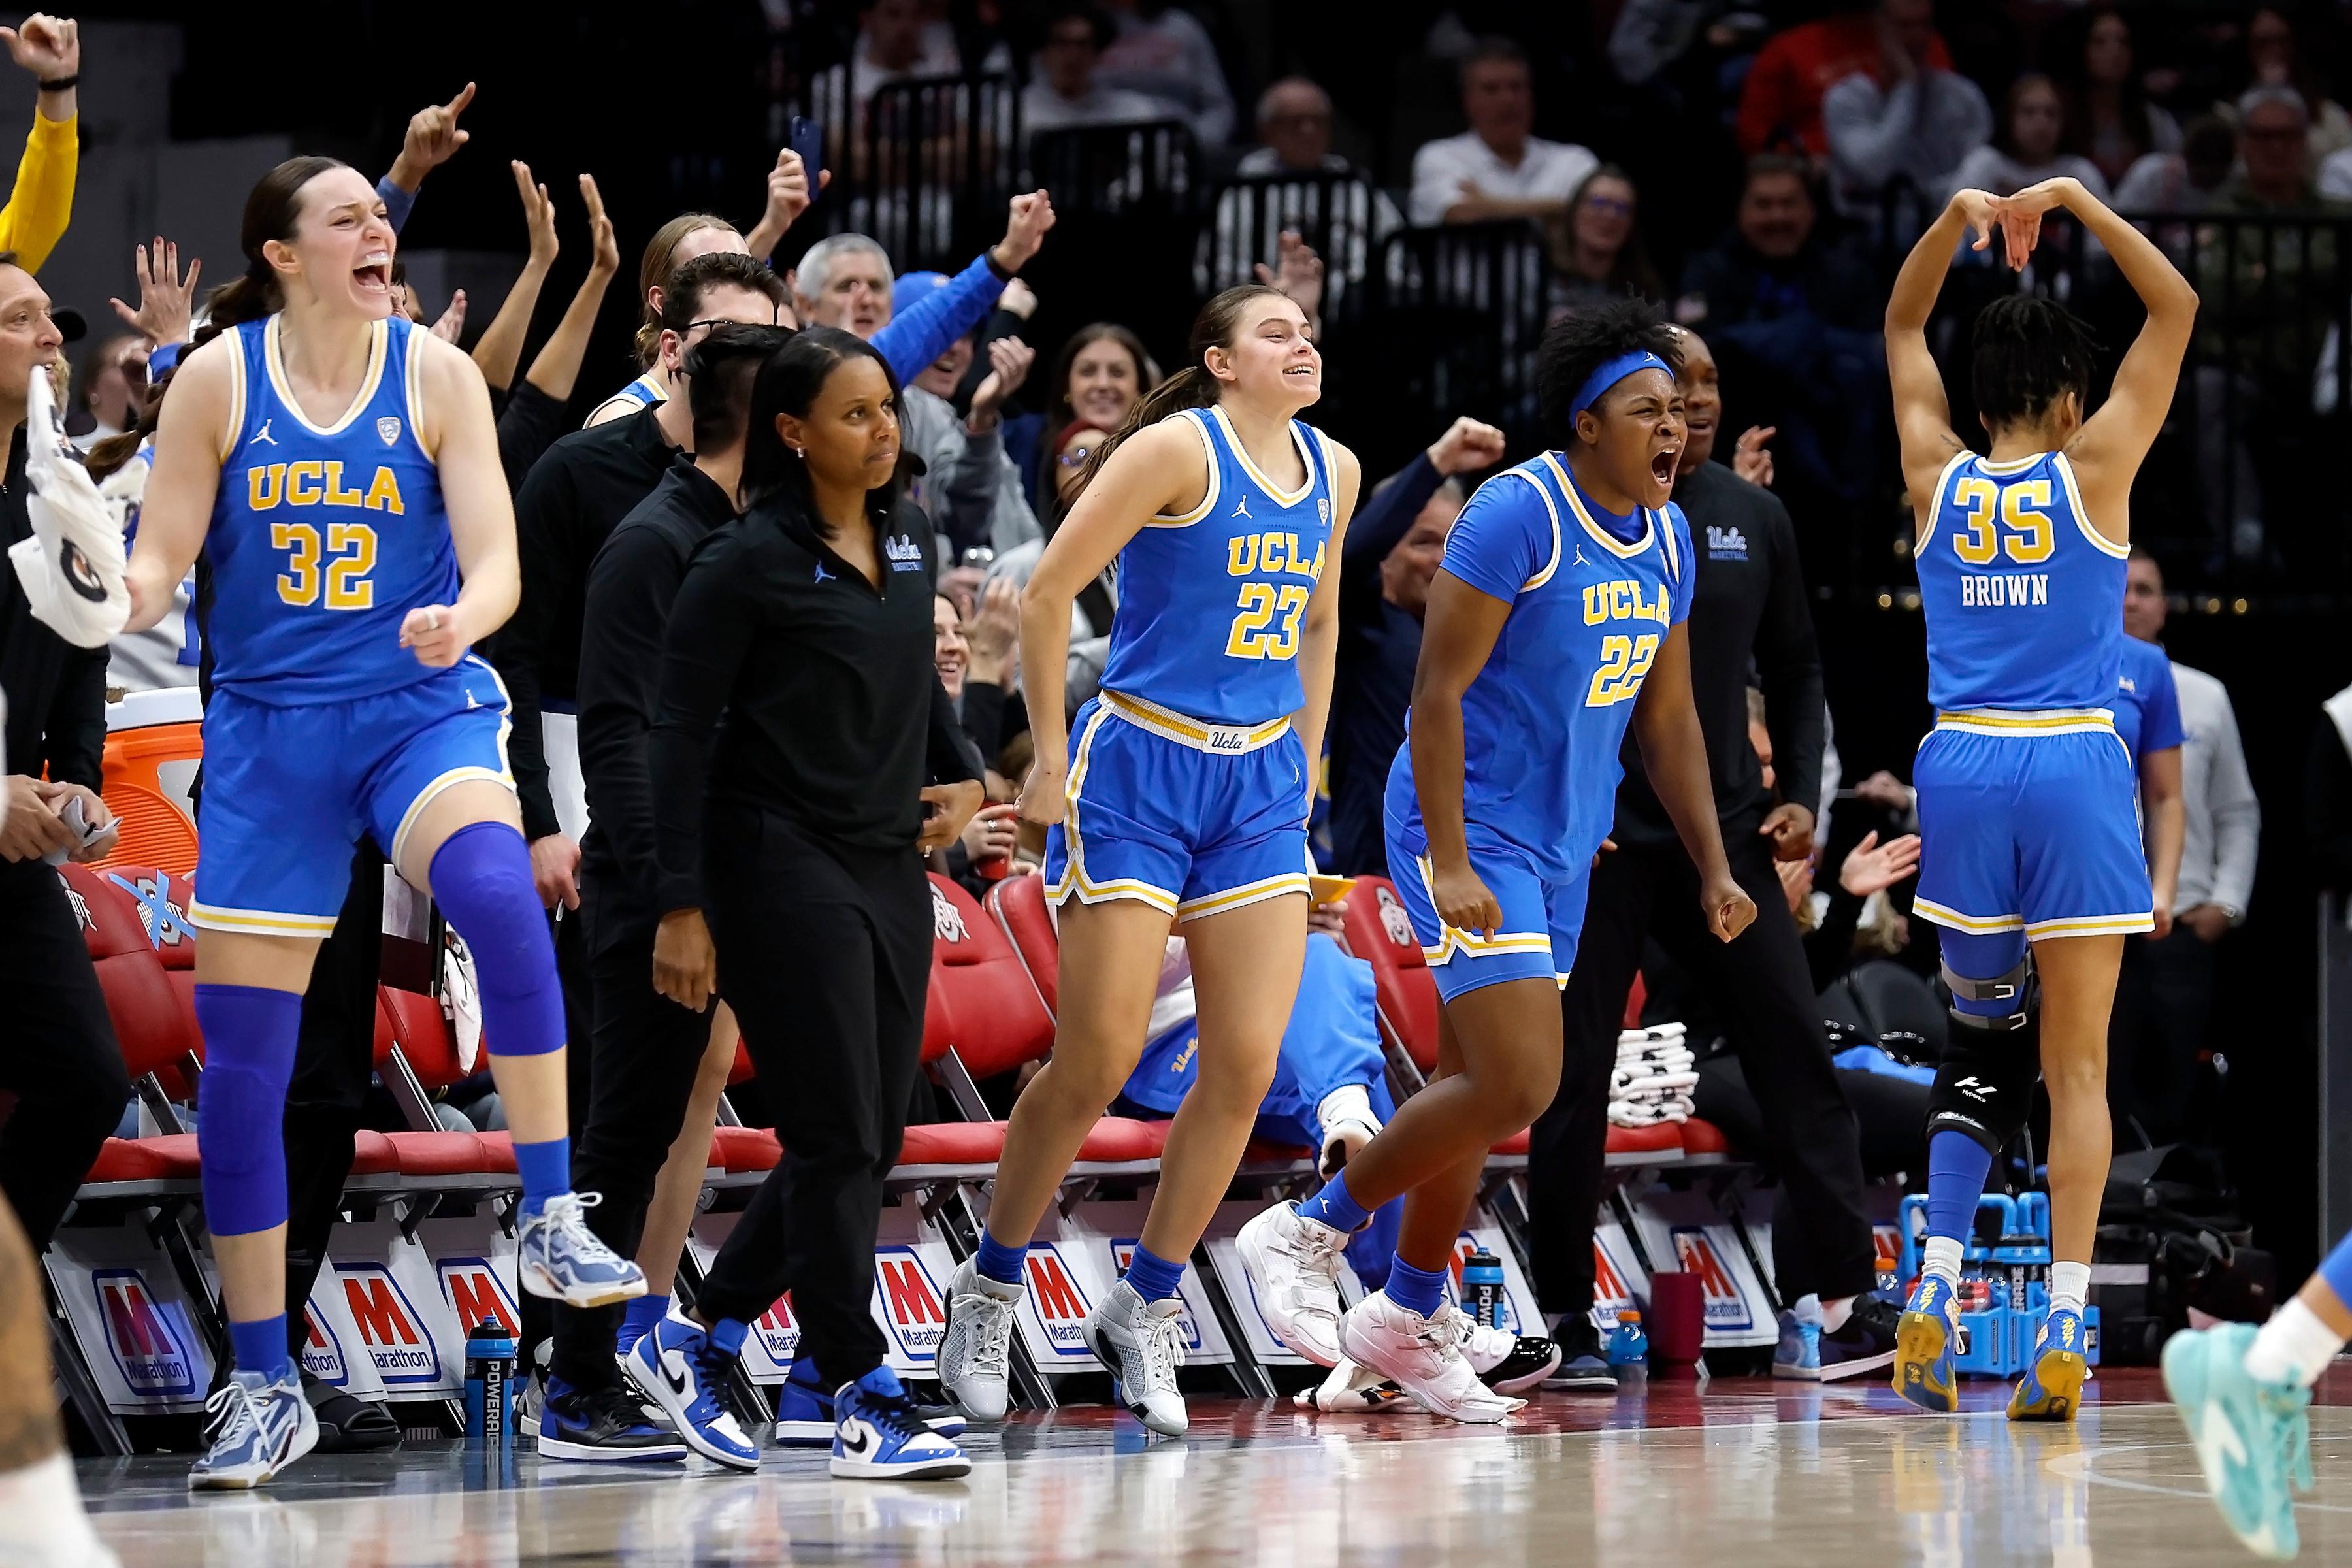 Osborne, Betts Lead No. 5 UCLA Past Third-Ranked Colorado 76–68 in First Women’s Sellout in Boulder